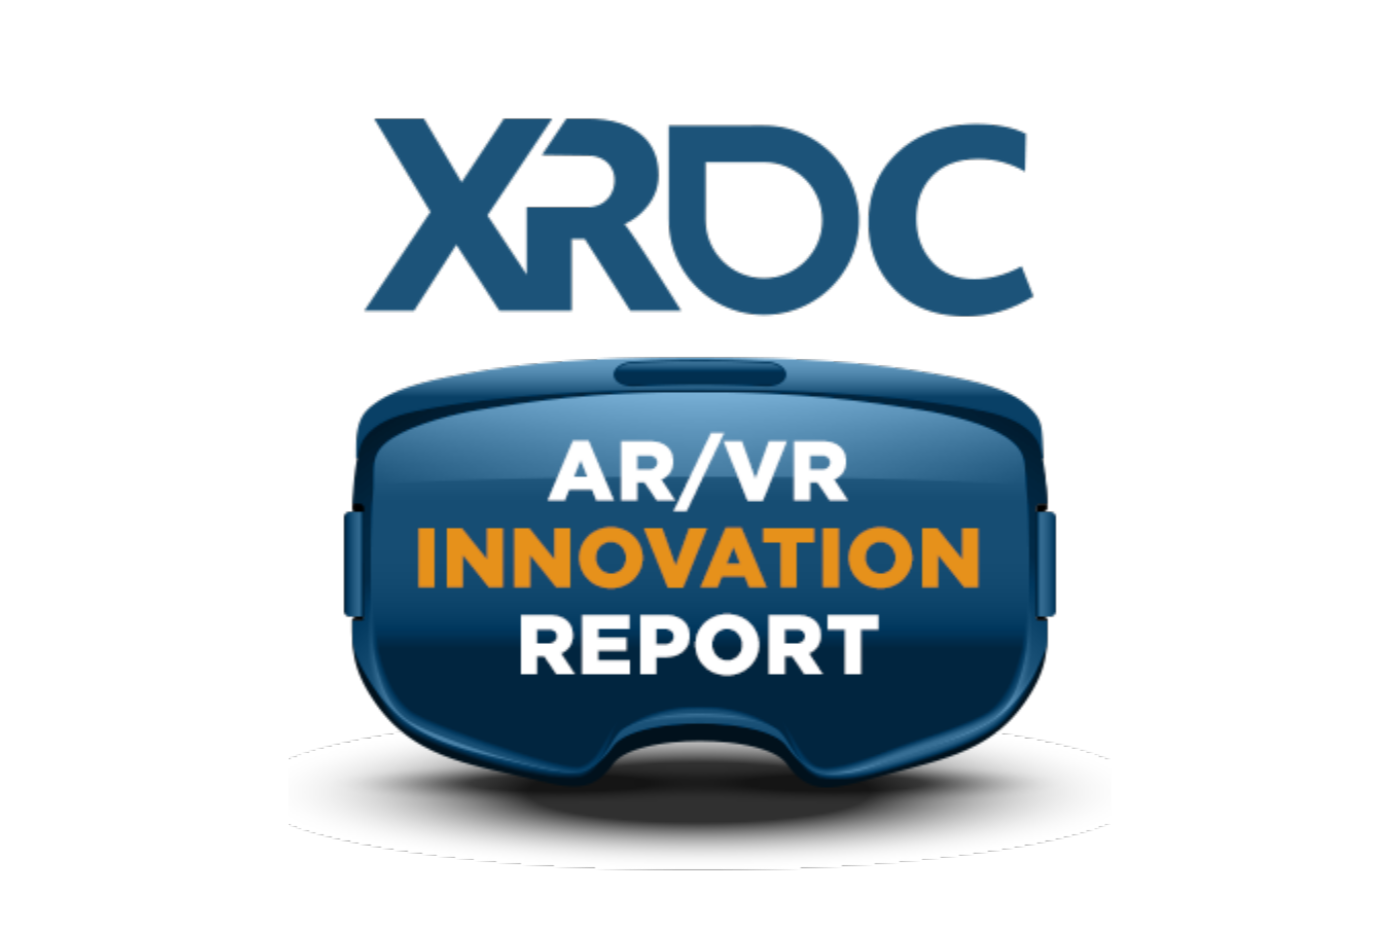 XRDC report state of AR/VR innovation